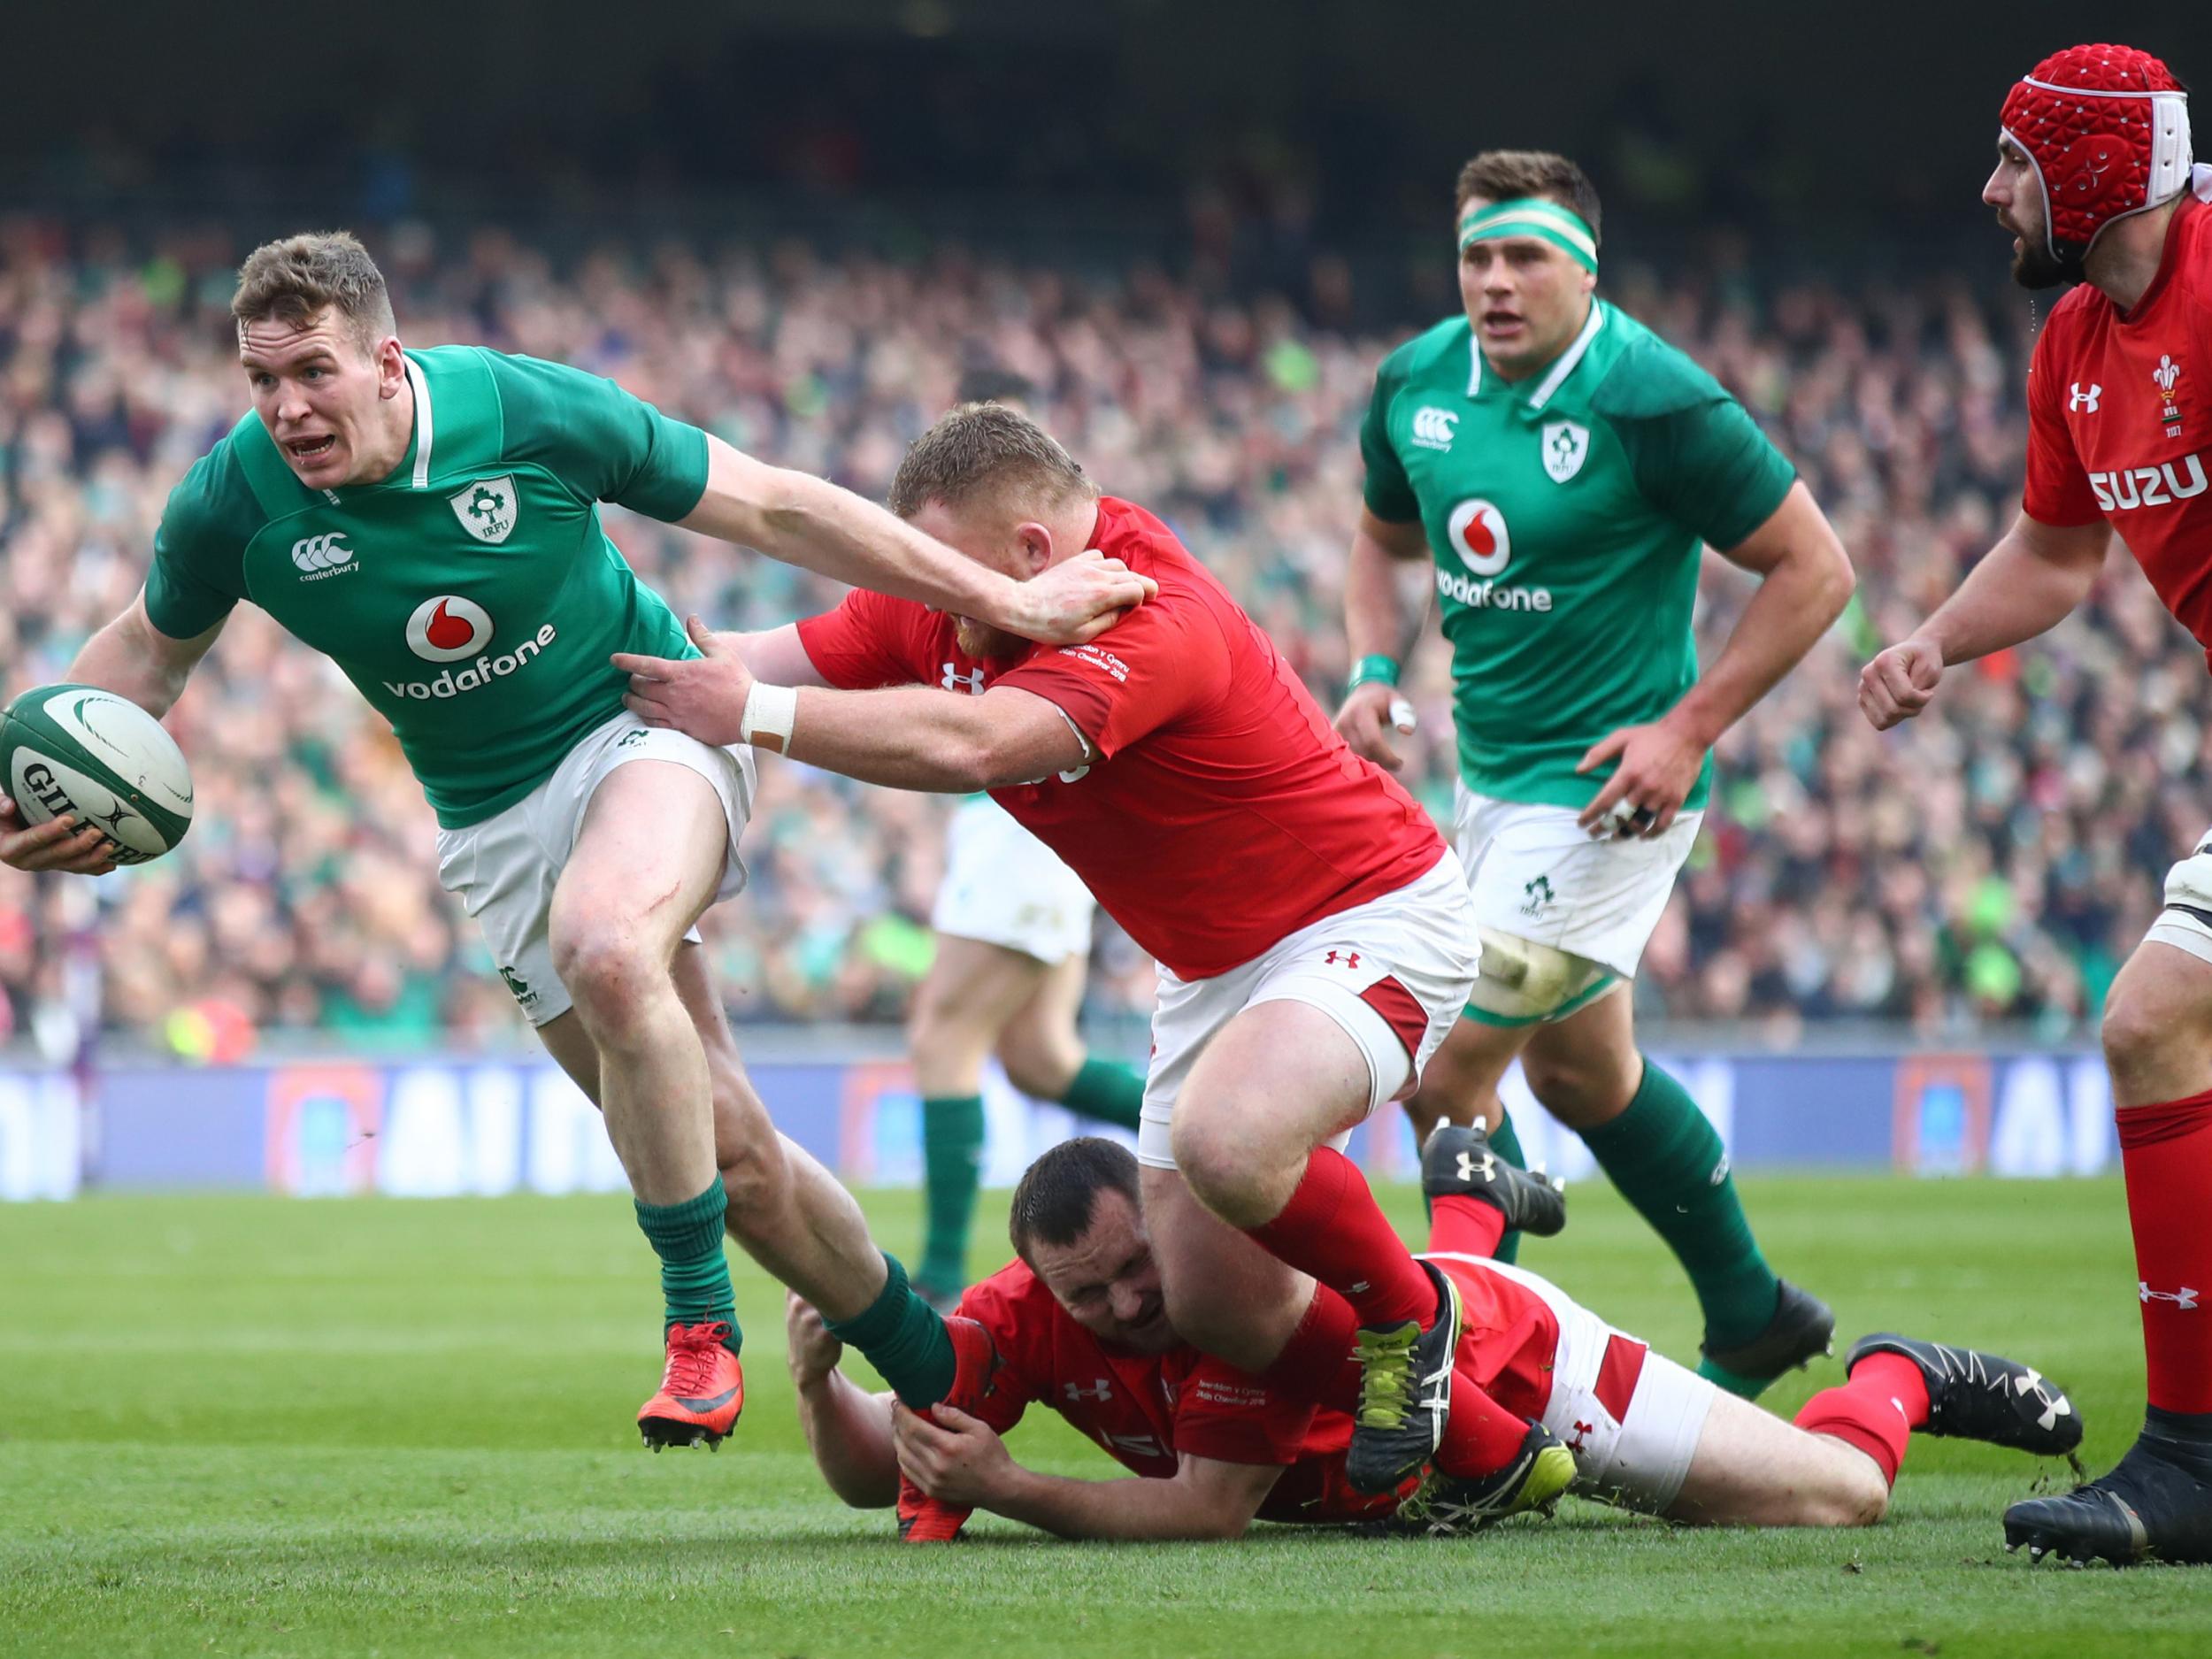 Chris Farrell breaks from the tackle of Samson Lee during Ireland’s victory over Wales